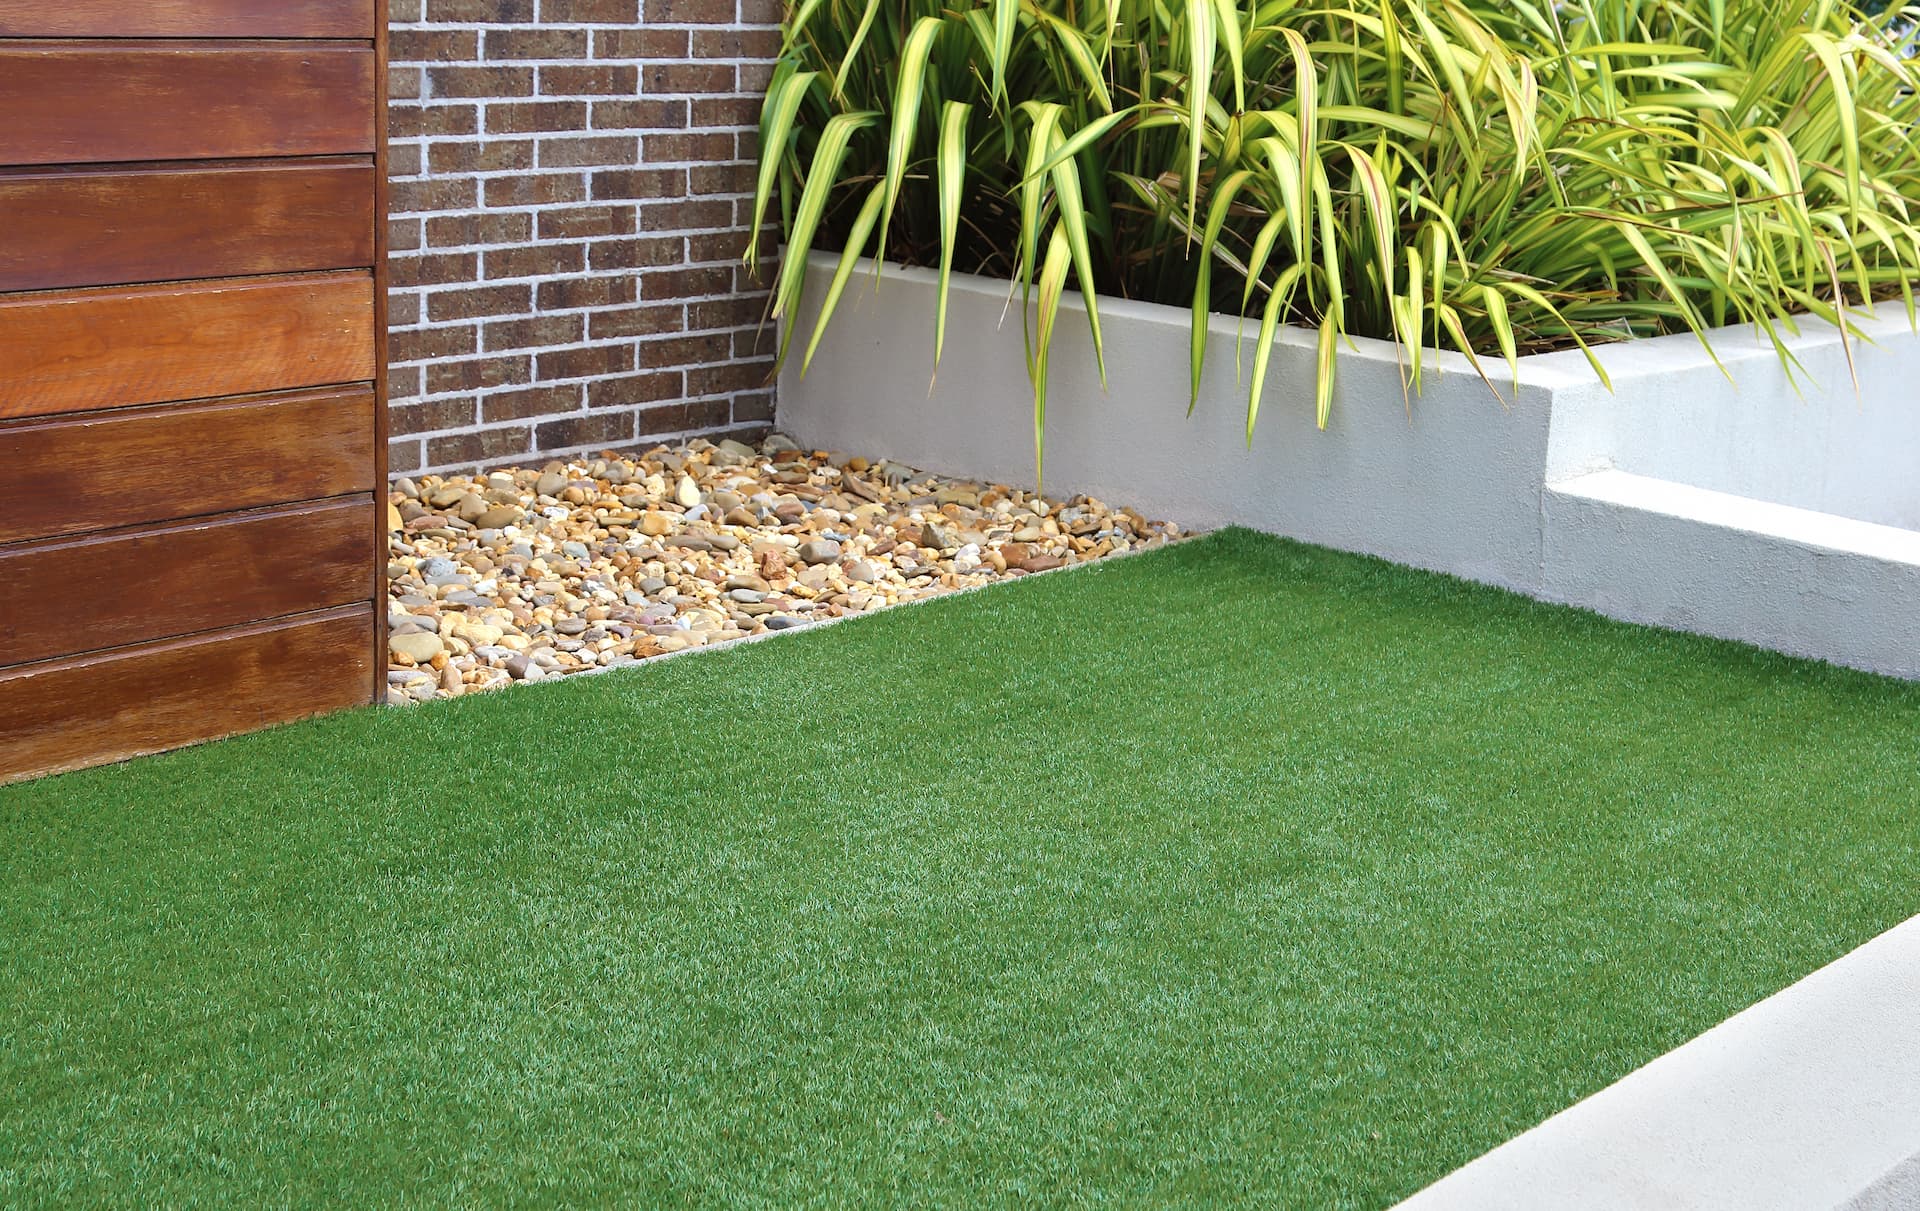 Licenced Artificial Grass & Turf services in Ashton-under-Lyne